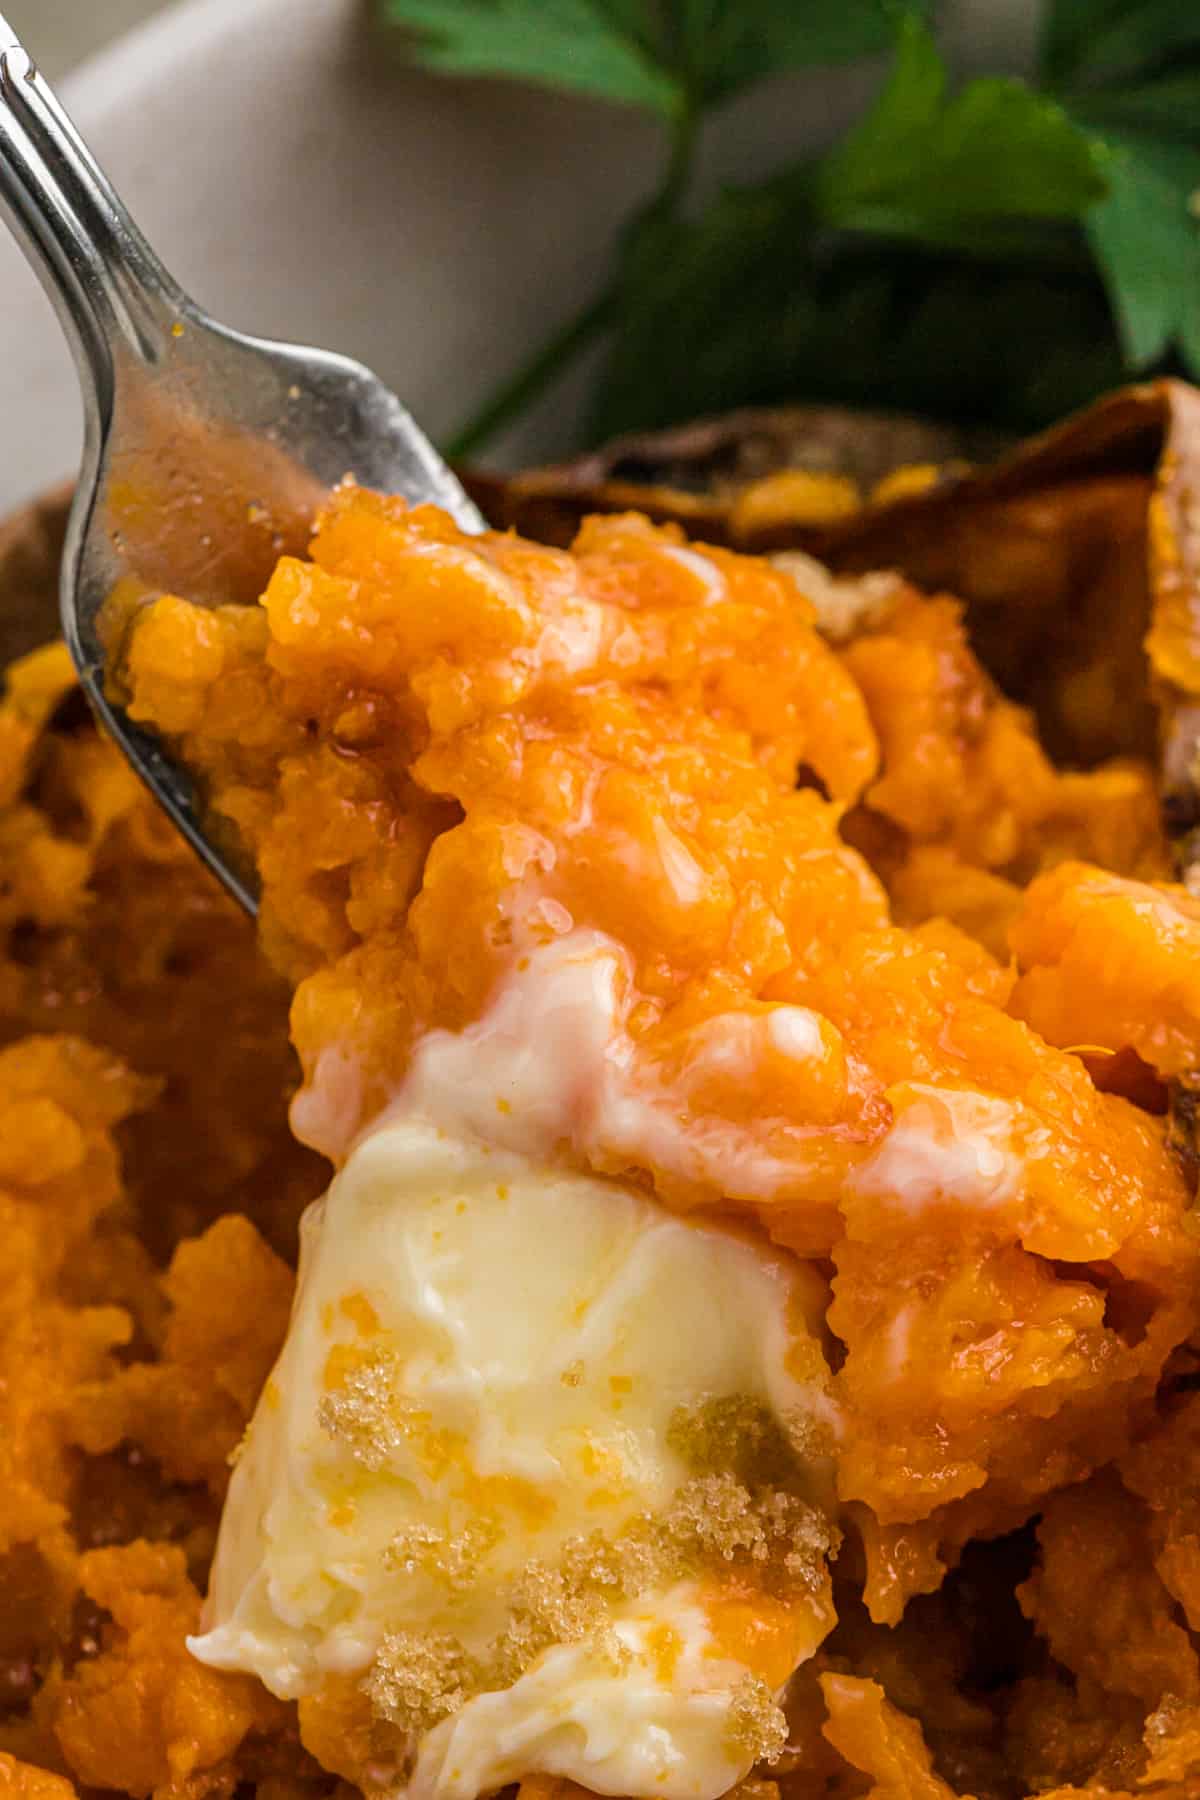 A fork lifting a bite of baked sweet potato with butter.